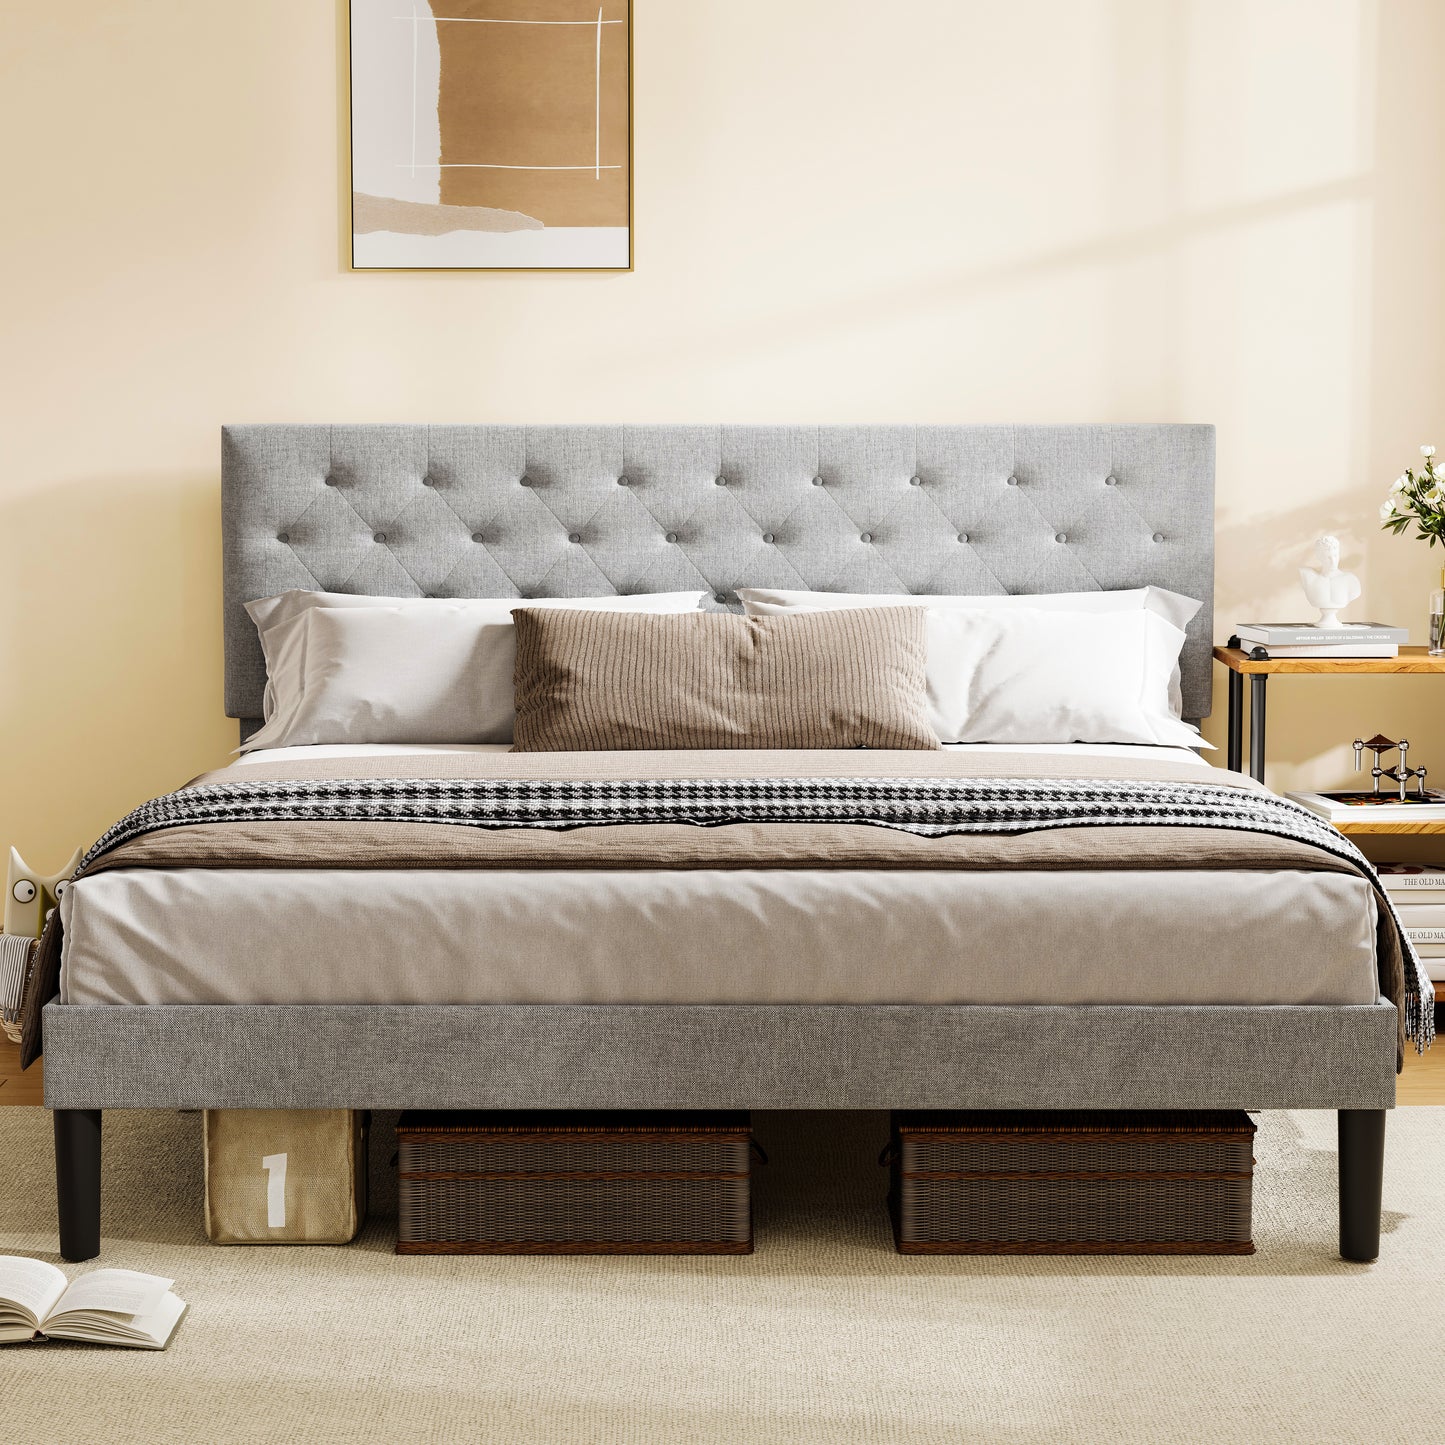 SYNGAR Queen Size Bed Frame, Fabric Upholstered Platform Bed Frame with Adjustable Button Tufted Headboard, Bedroom Furniture with Strong Wooden Slat Support, No Box Spring Needed, Light Gray